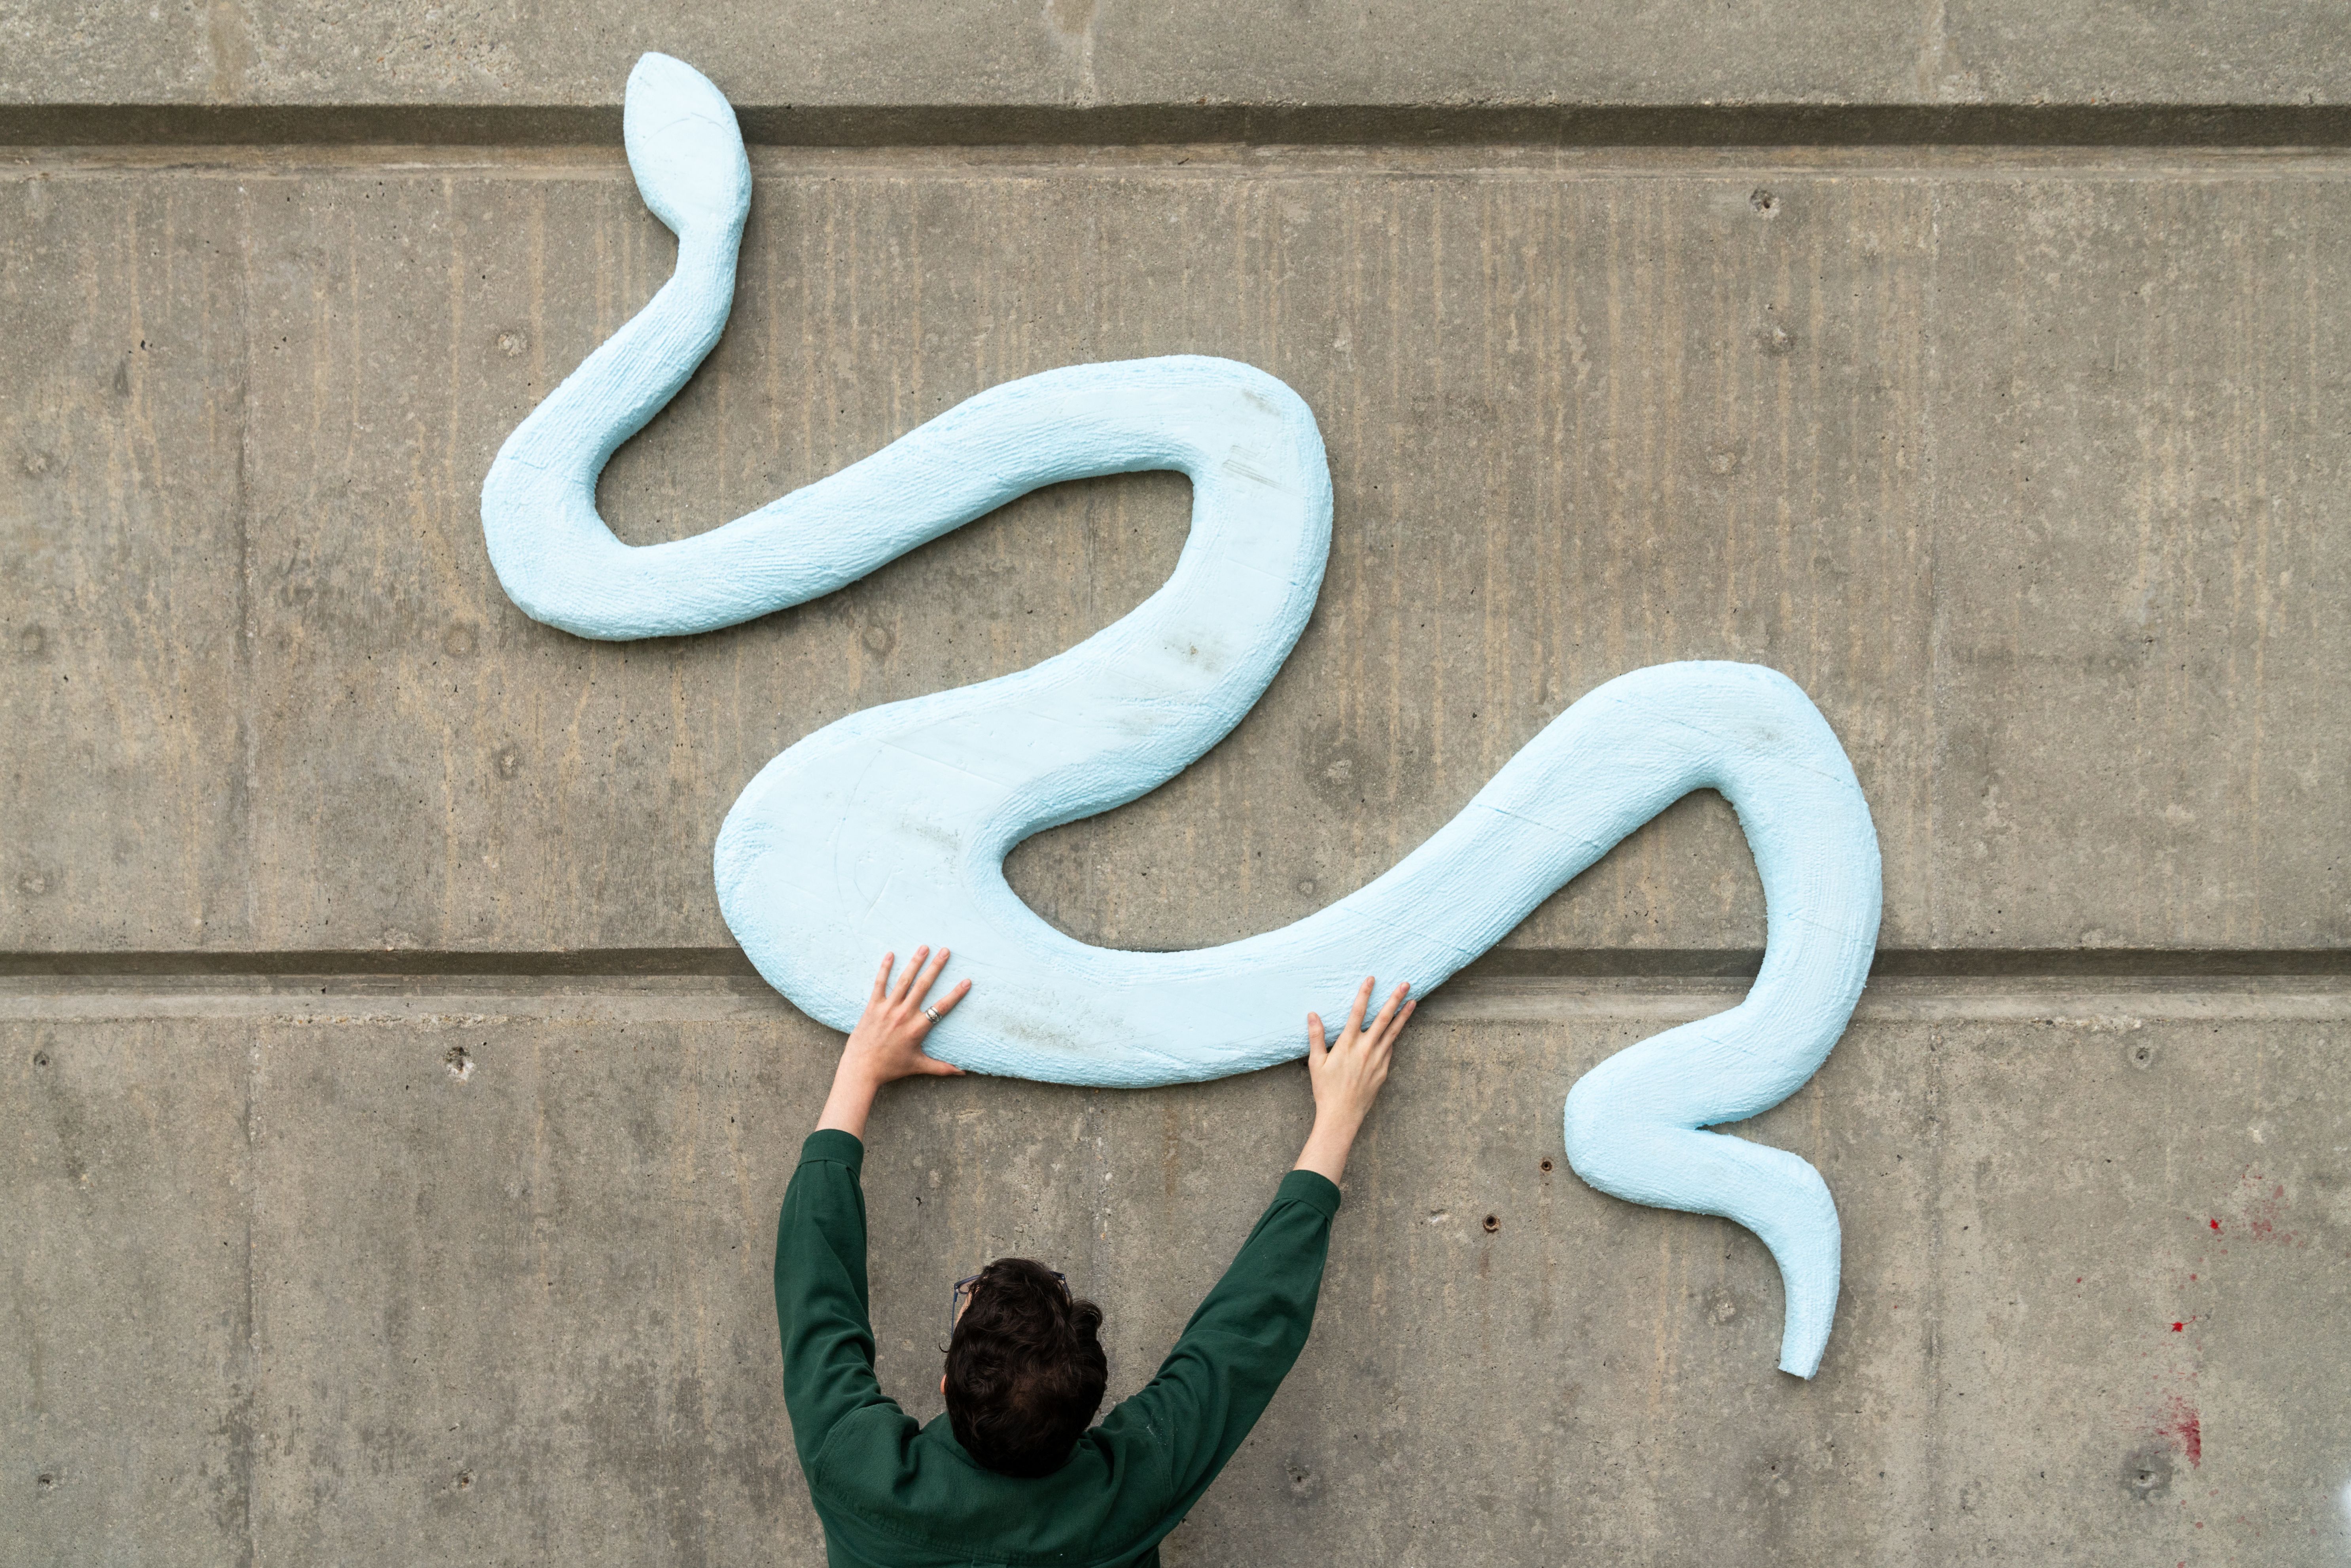 An MFA student installing a large sculpture depicting a snake.